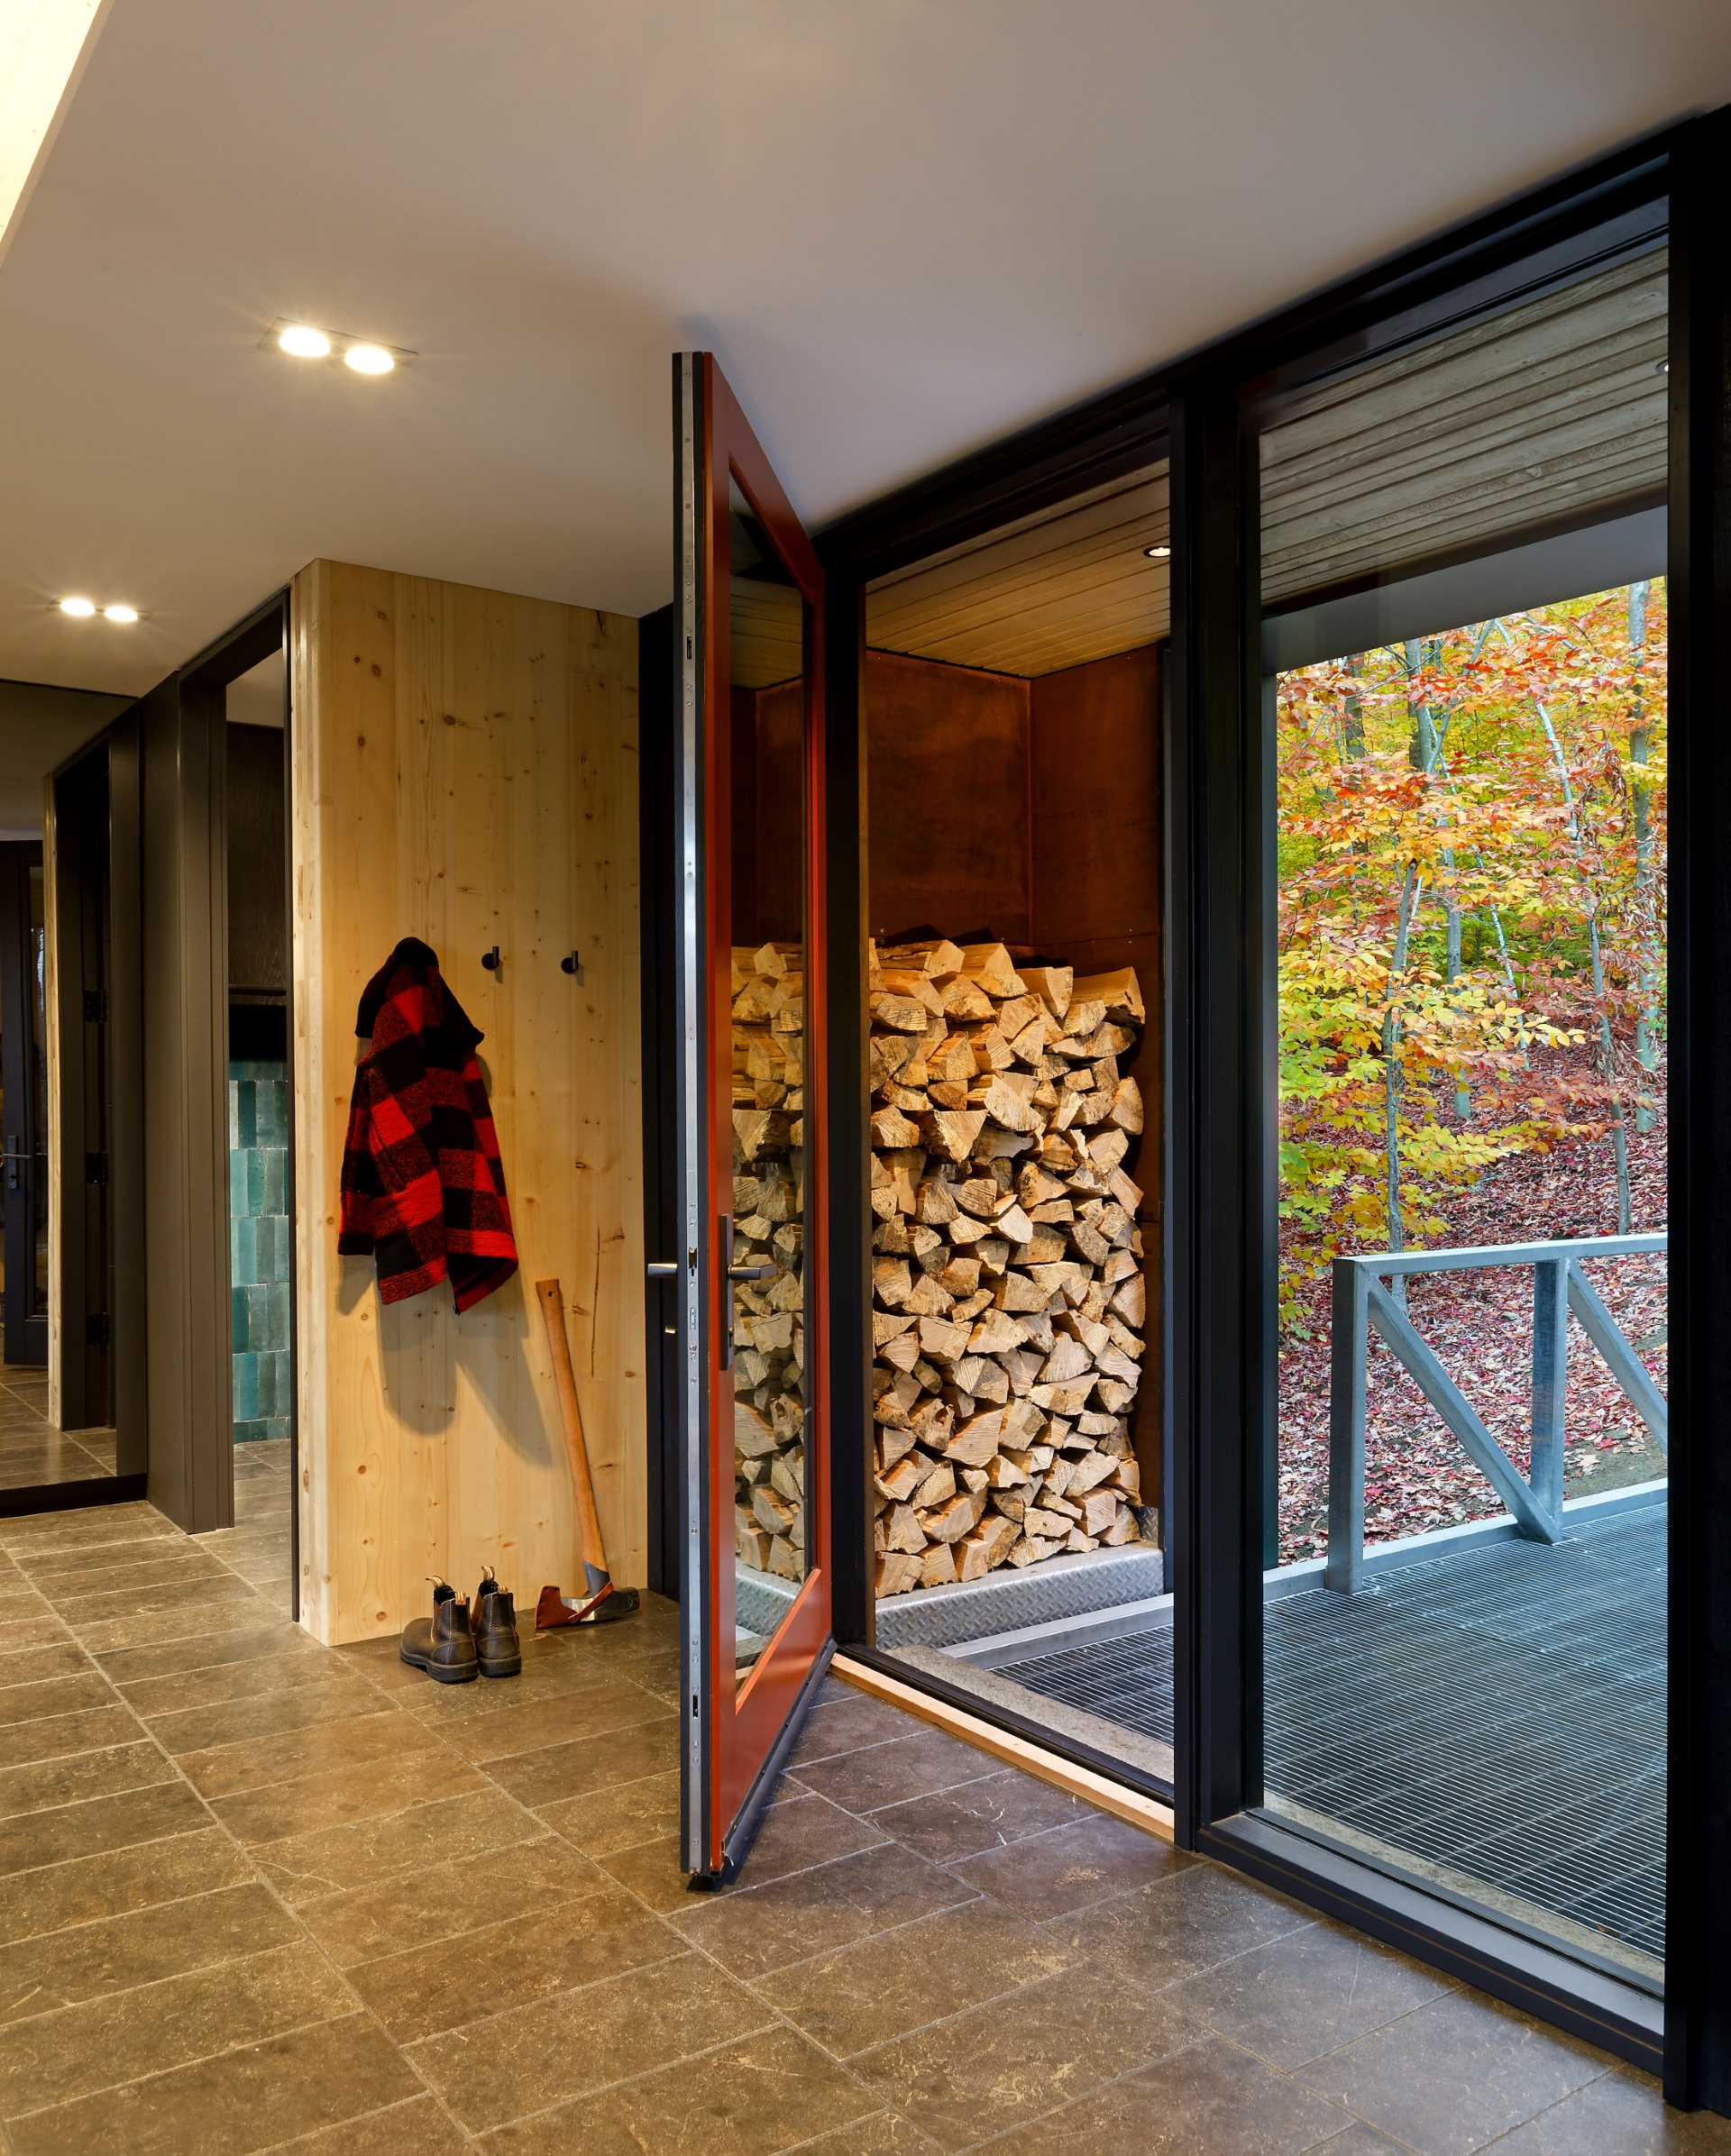 The entryway of this lake،use includes outdoor storage for firewood.